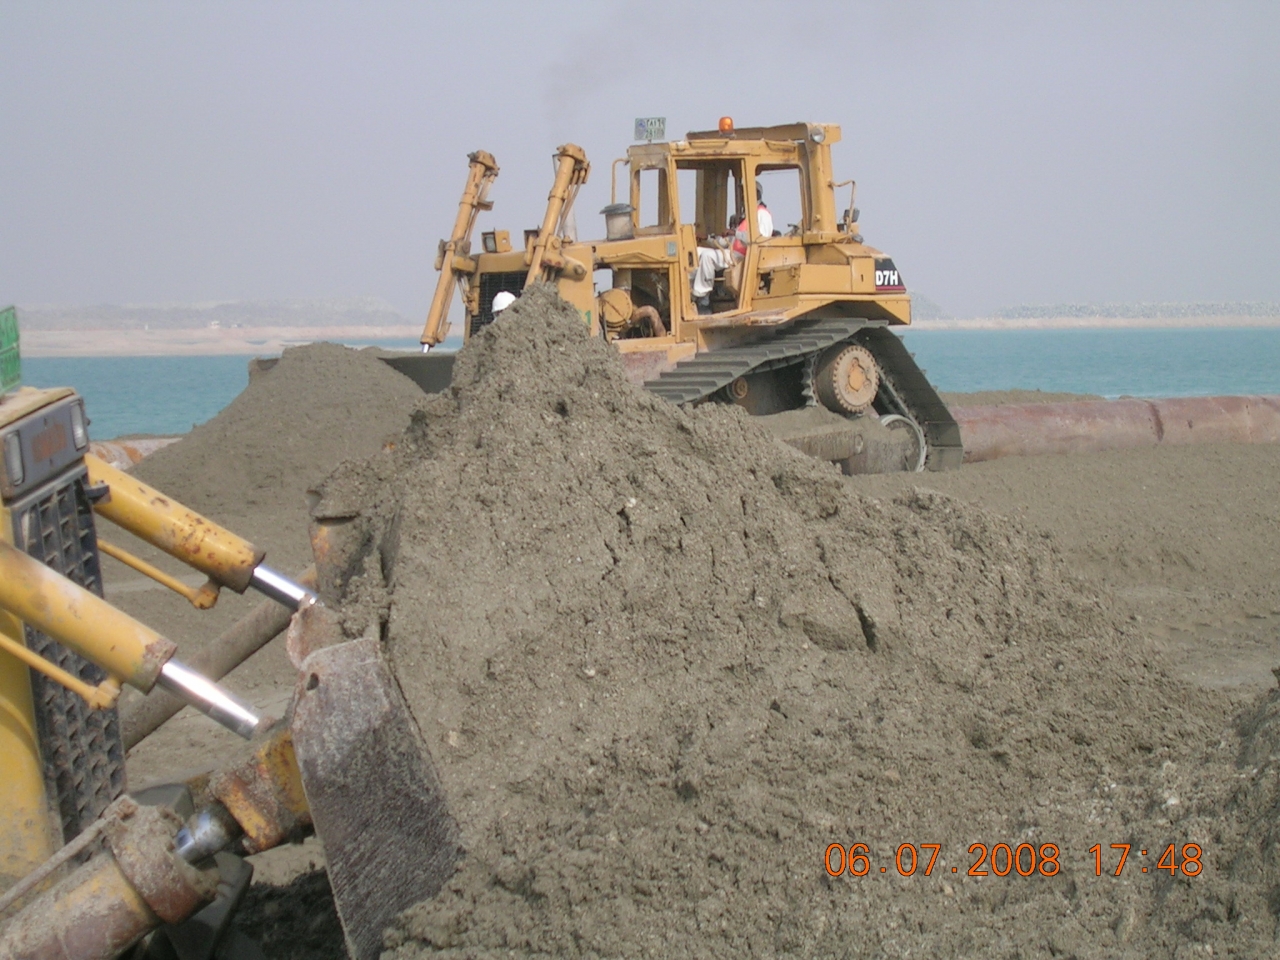 Port Zayed Development for reconstructing berths, and dredging in 1999 - 2000